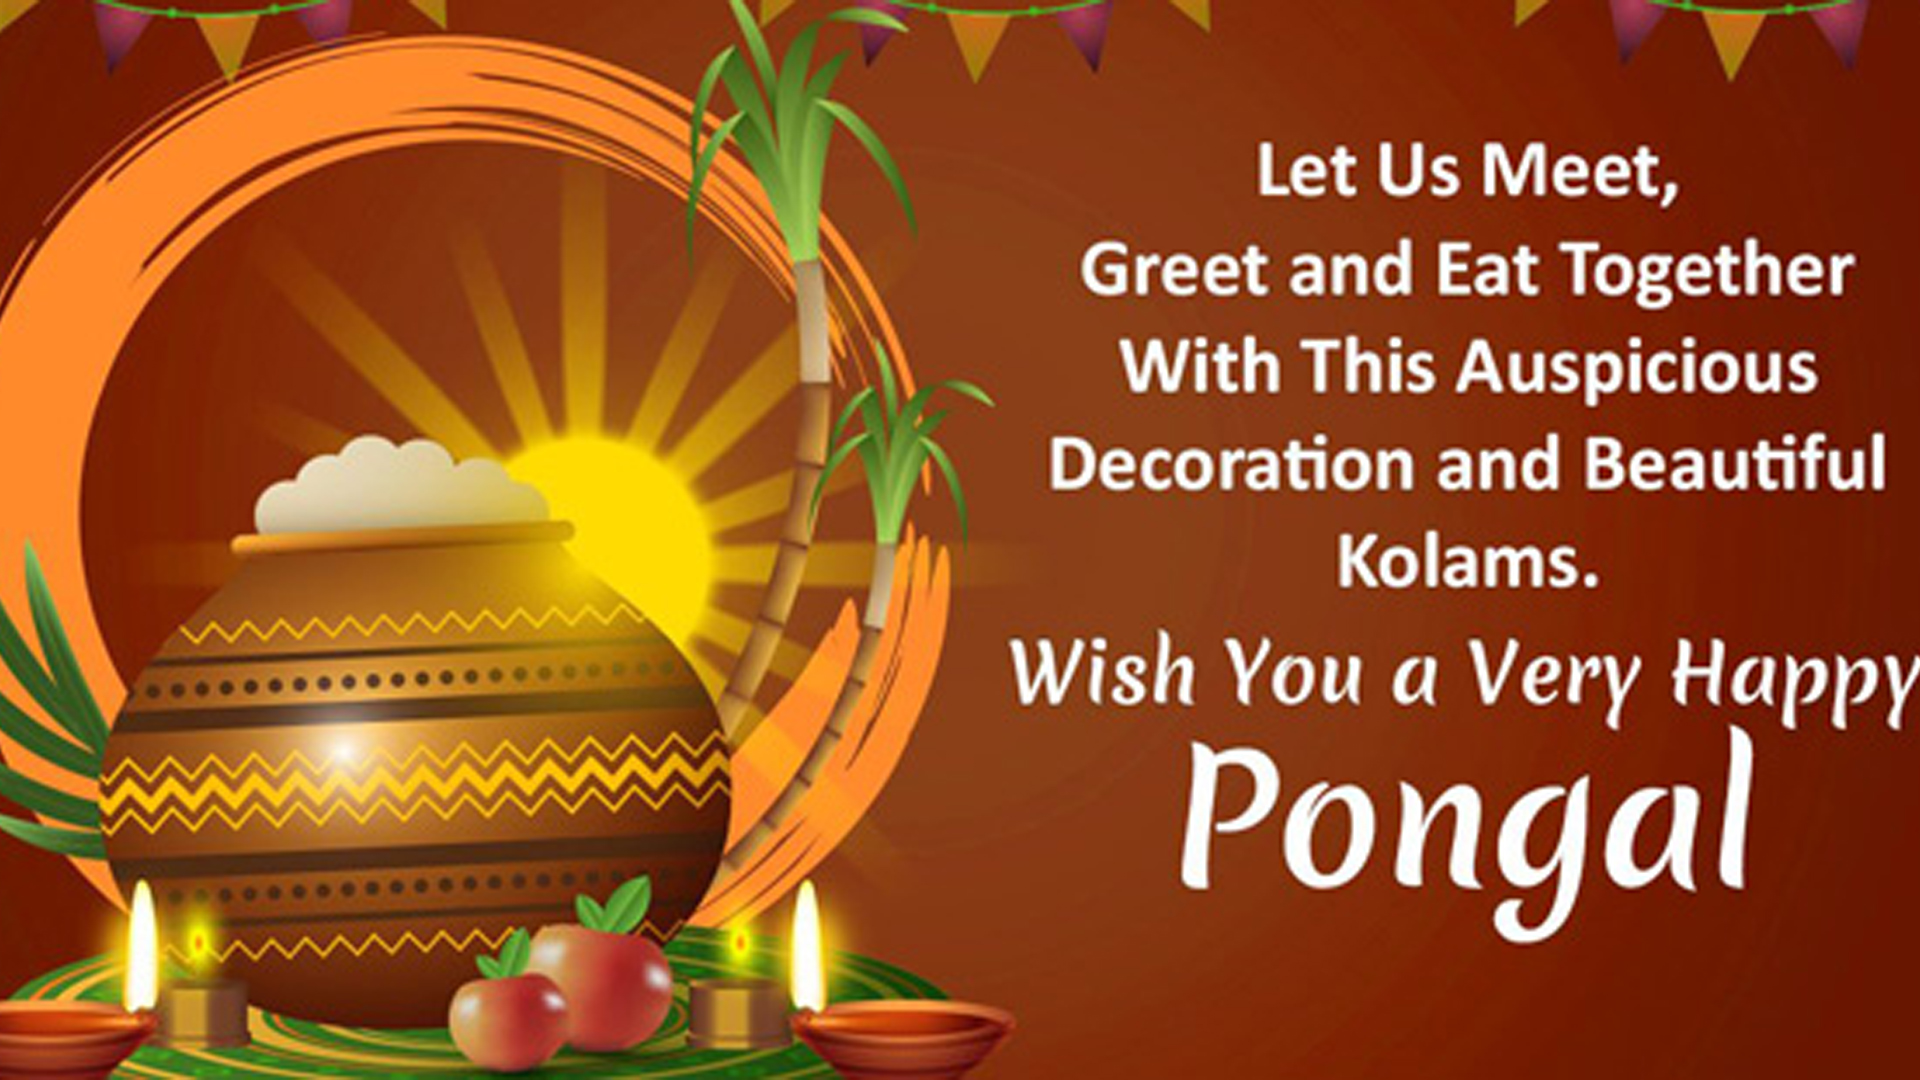 Let Us Meet Greet And Eat Together With This Auspicious Decoration And Beautiful Kolams HD Pongal